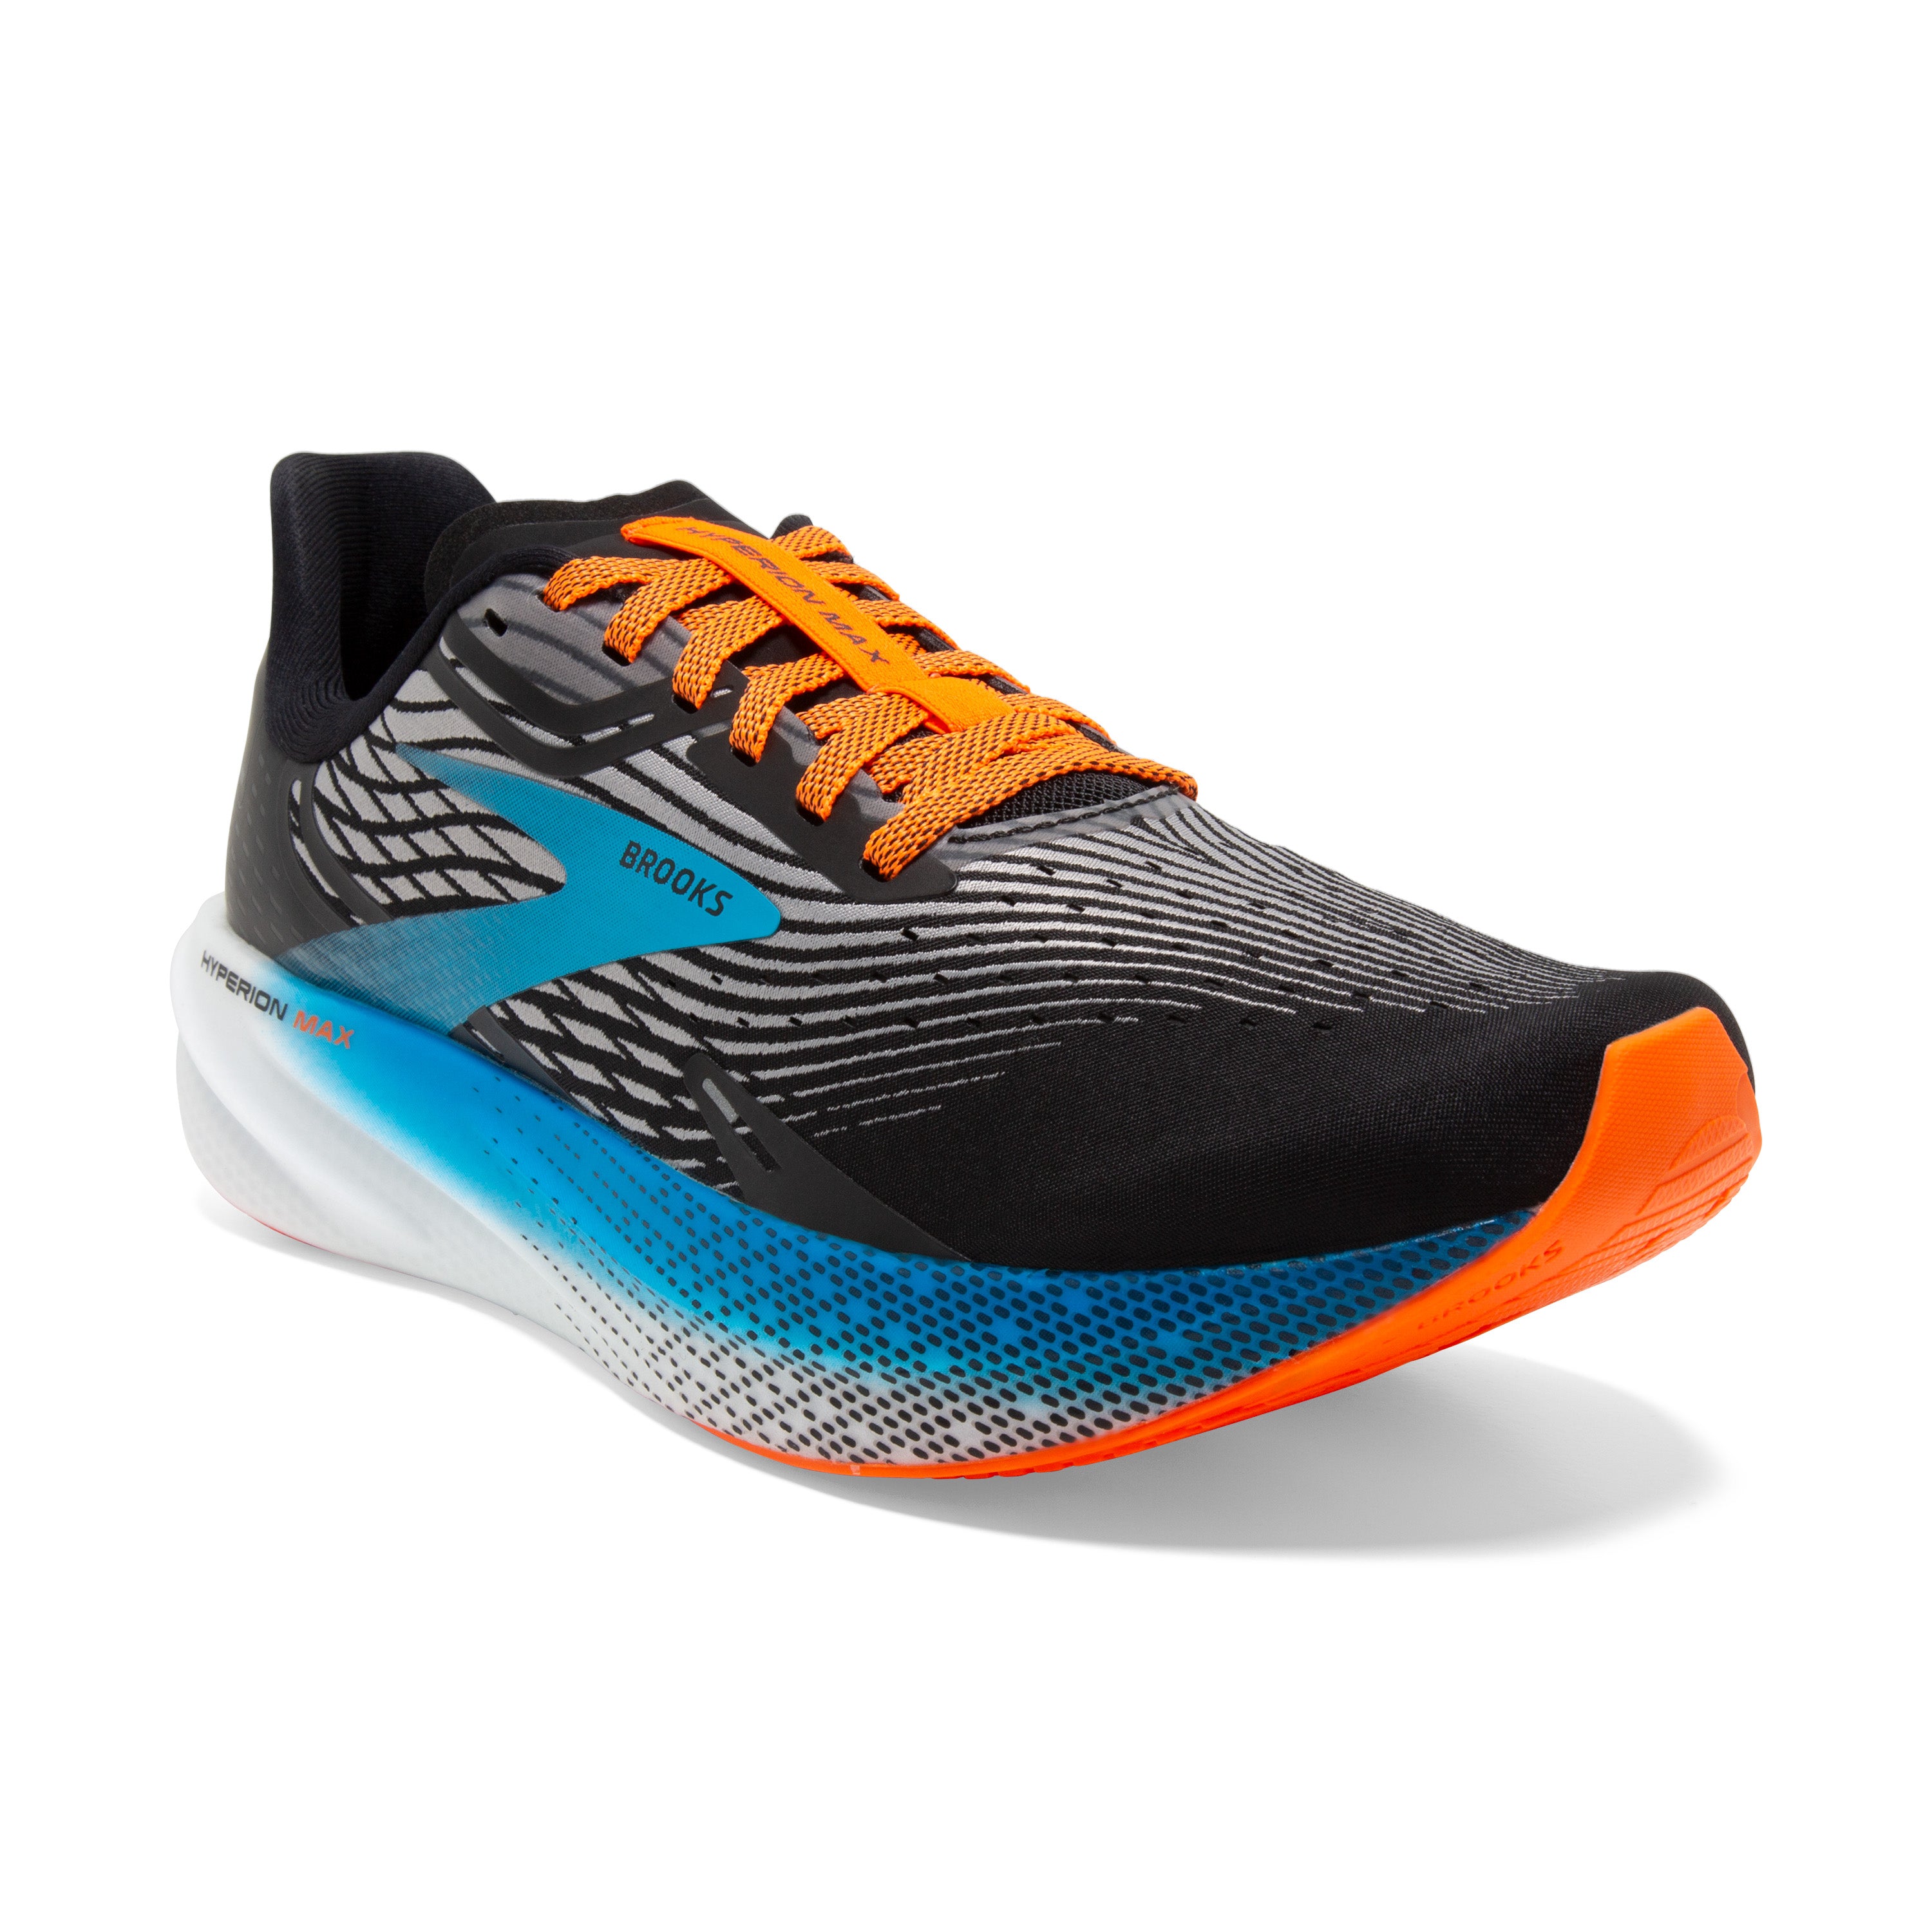 Hyperion Max - Road Running Shoes for Men